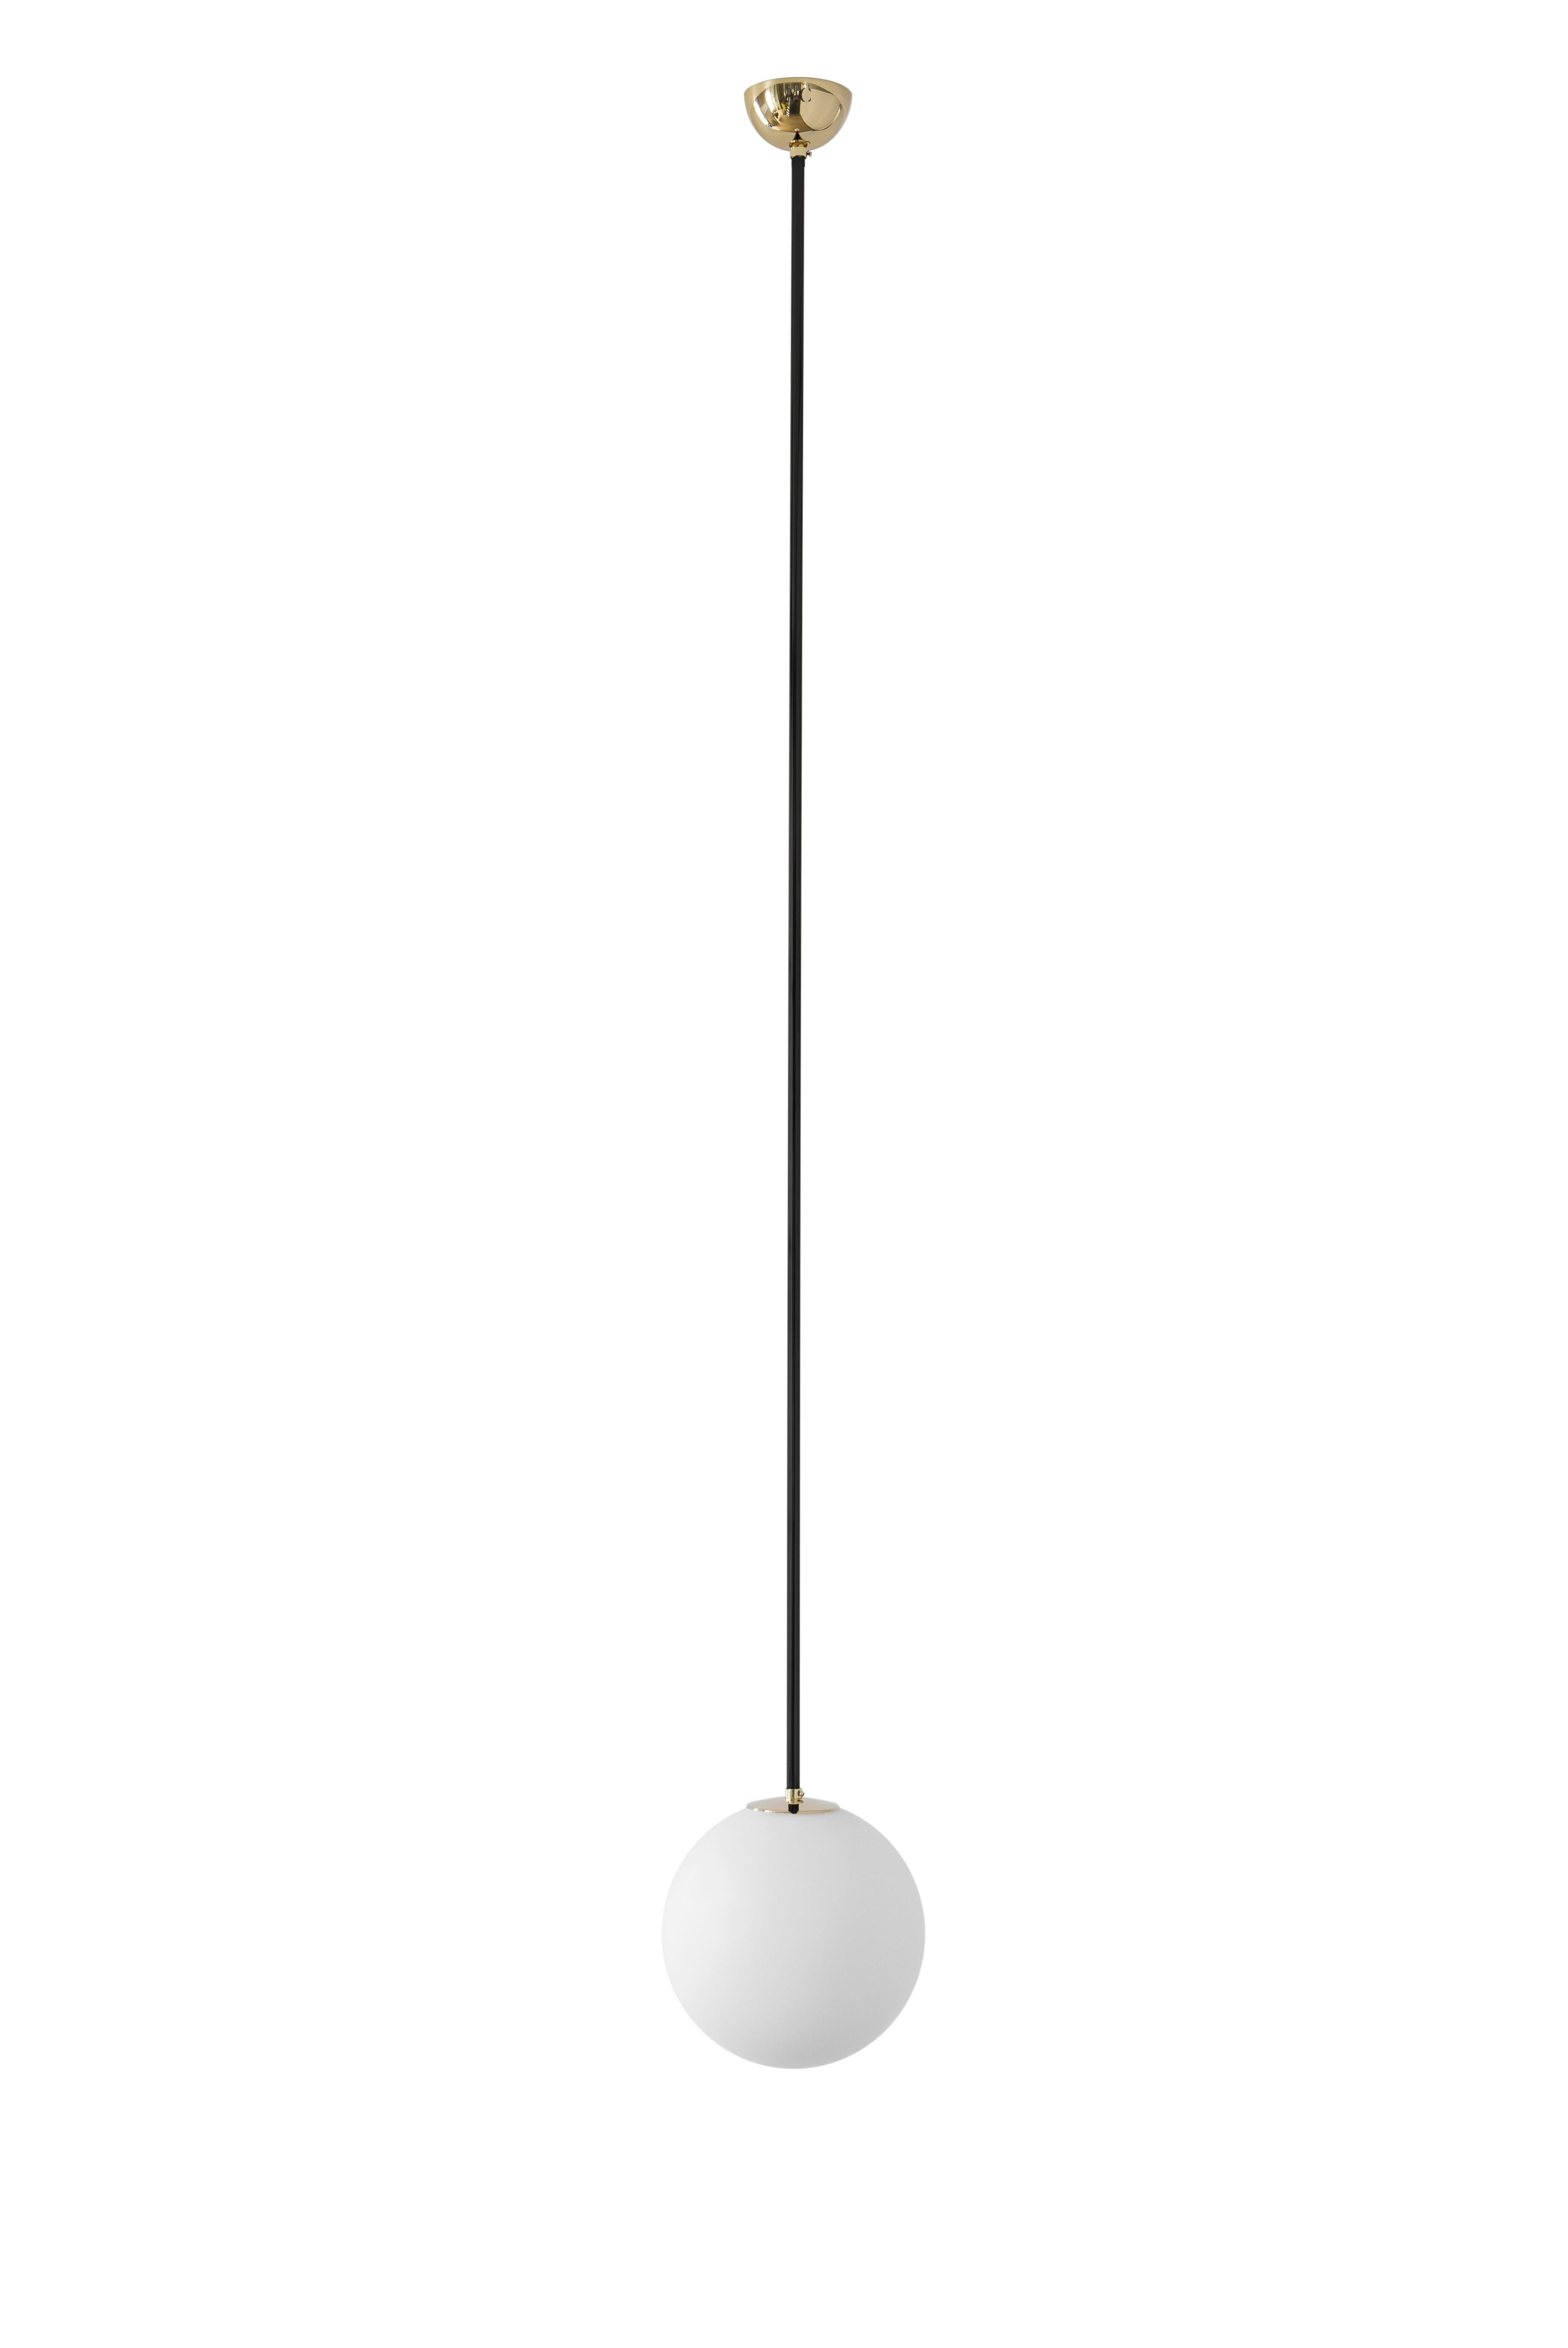 Black pendant 06 by Magic Circus Editions
Dimensions: D 25 x W 25 x H 190 cm, also available in H 110, 130, 150, 175 cm
Materials: Brass, mouth blown glass

All our lamps can be wired according to each country. If sold to the USA it will be